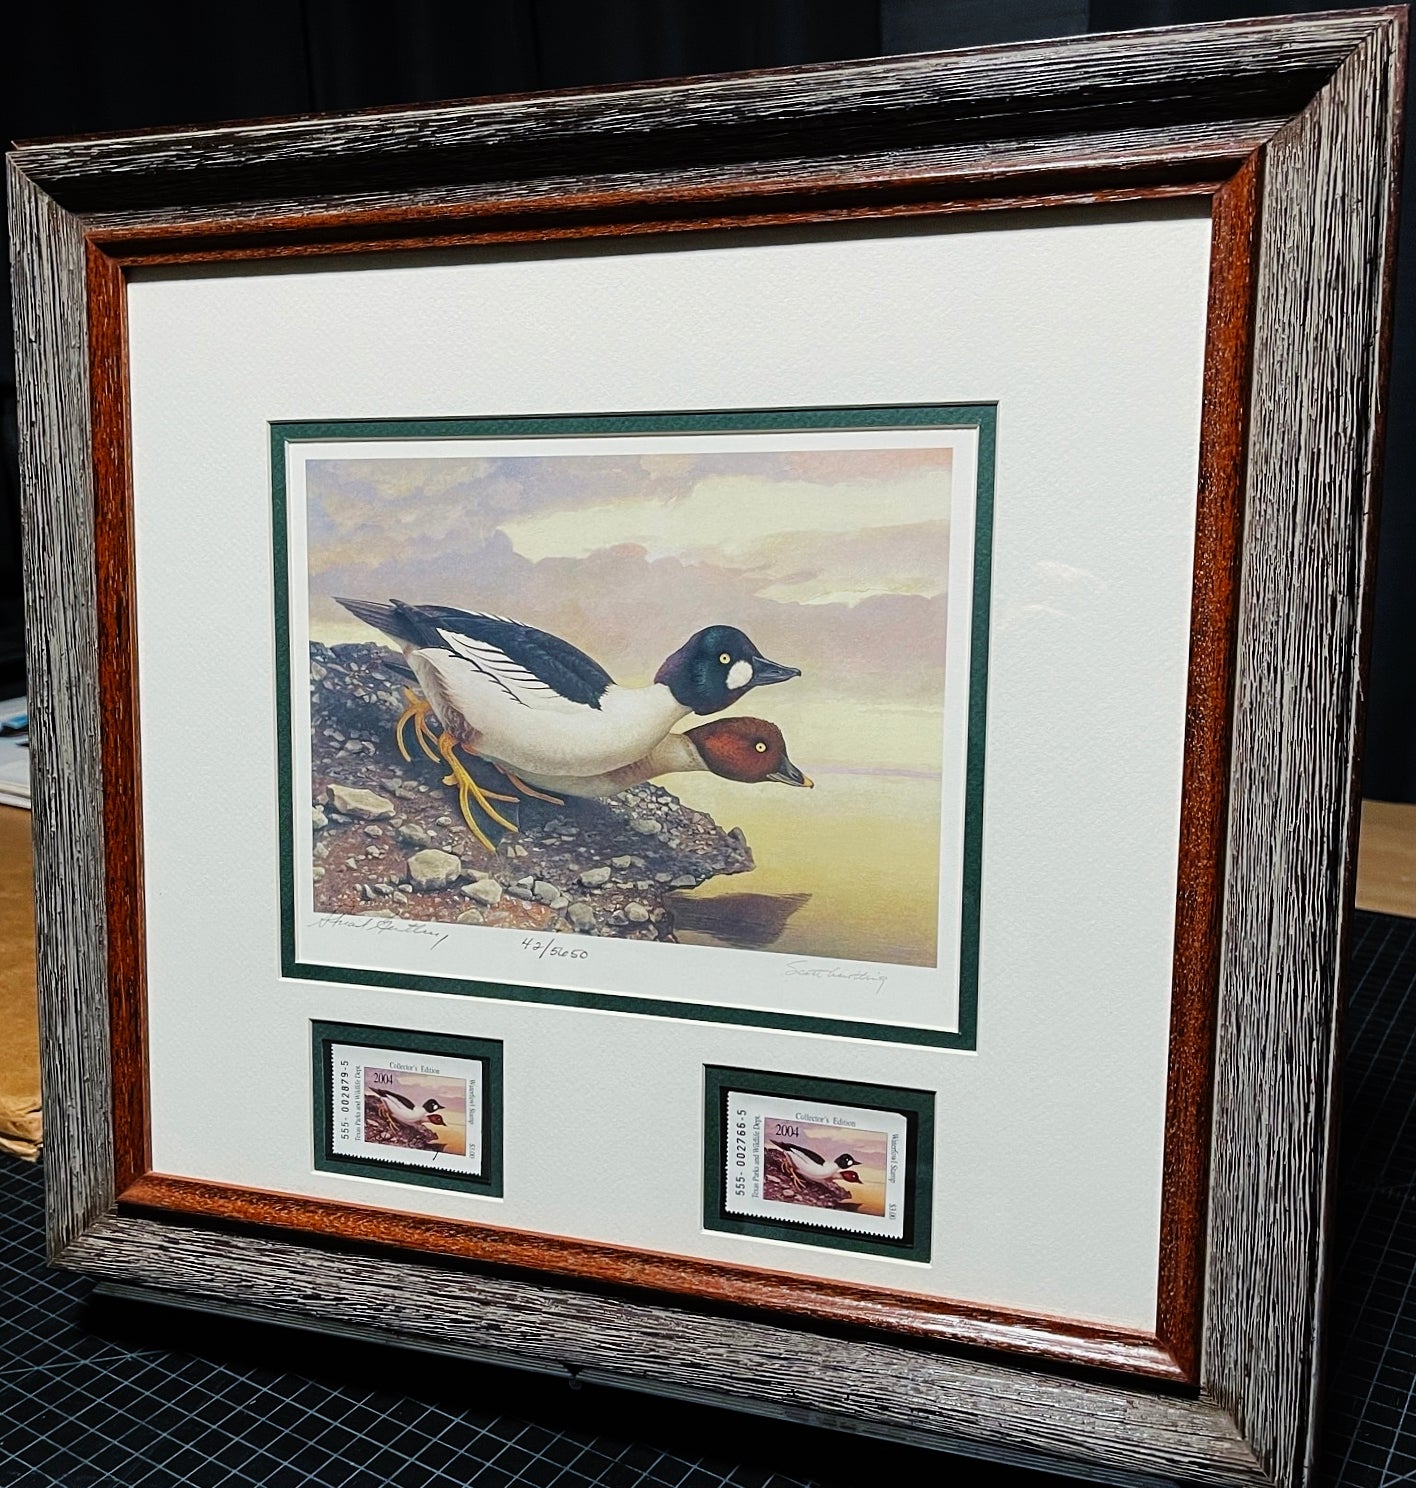 Scott & Stuart Gentling 2004 Texas Texas Waterfowl Stamp Print With Double Stamps - Brand New Custom Sporting Frame